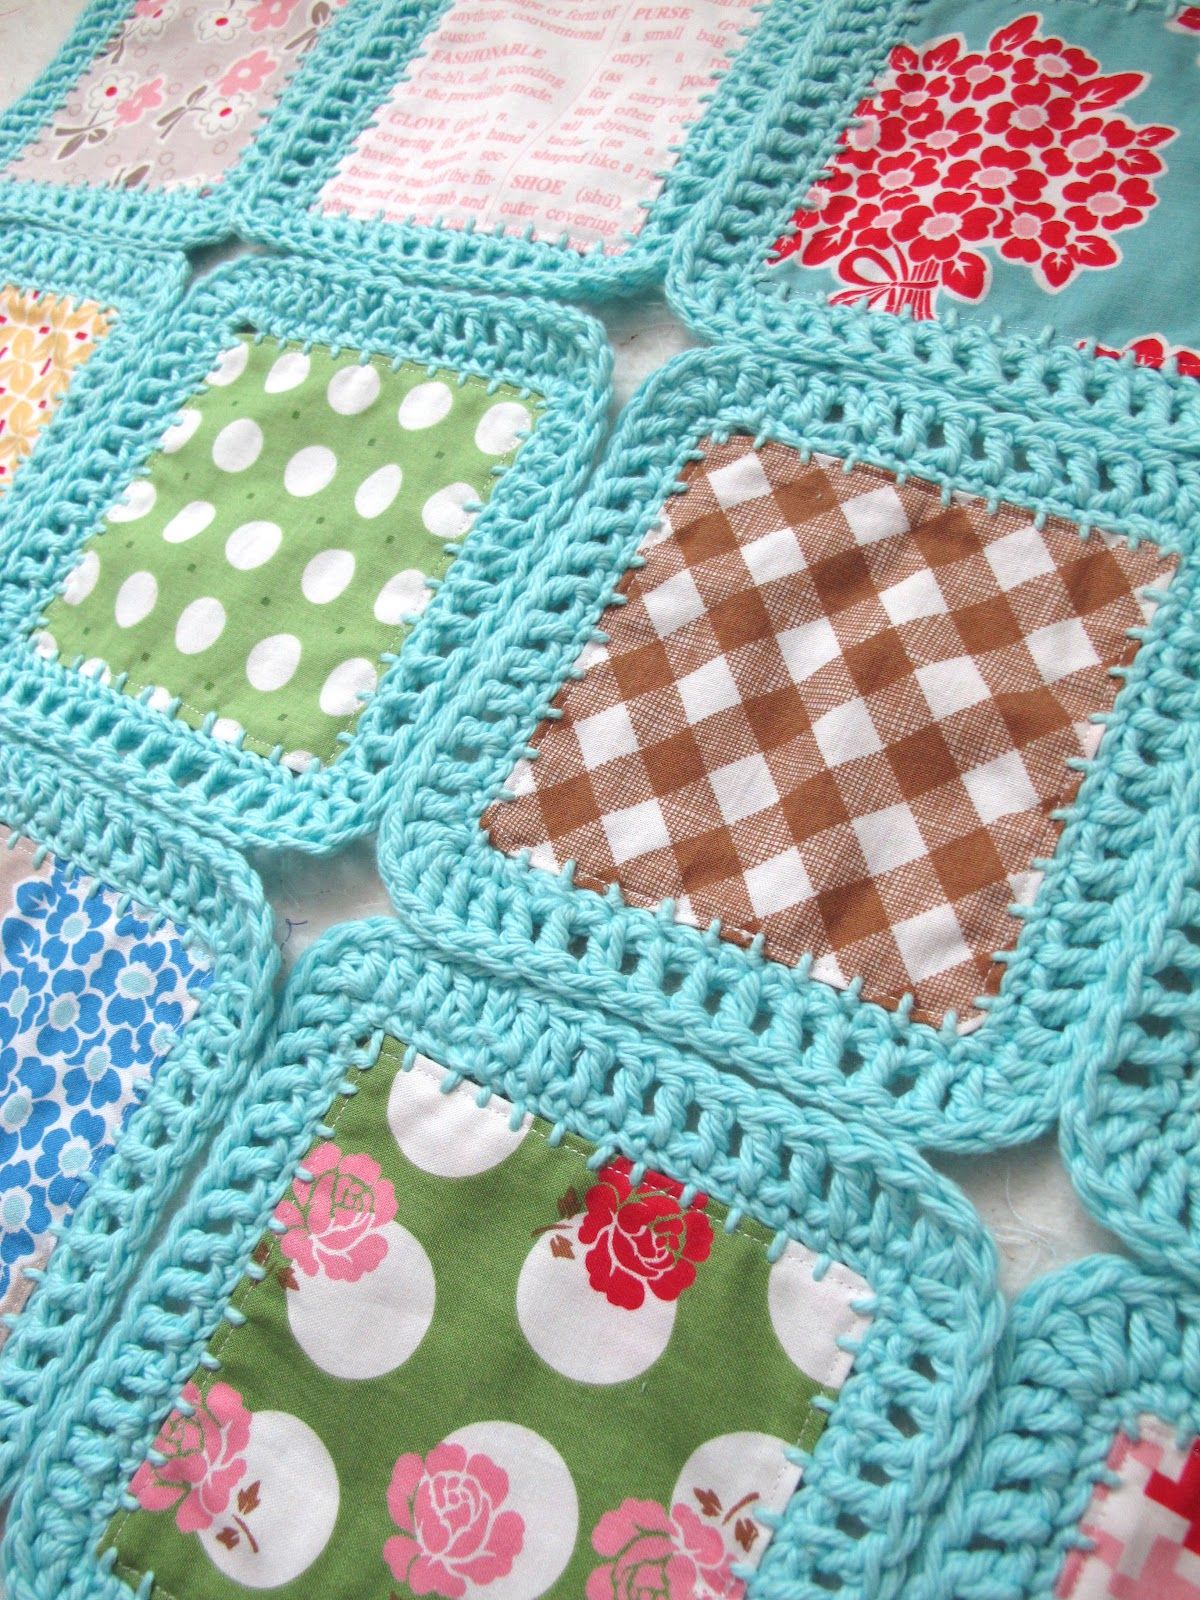 Fabric and Crochet Blanket - will need to make this!